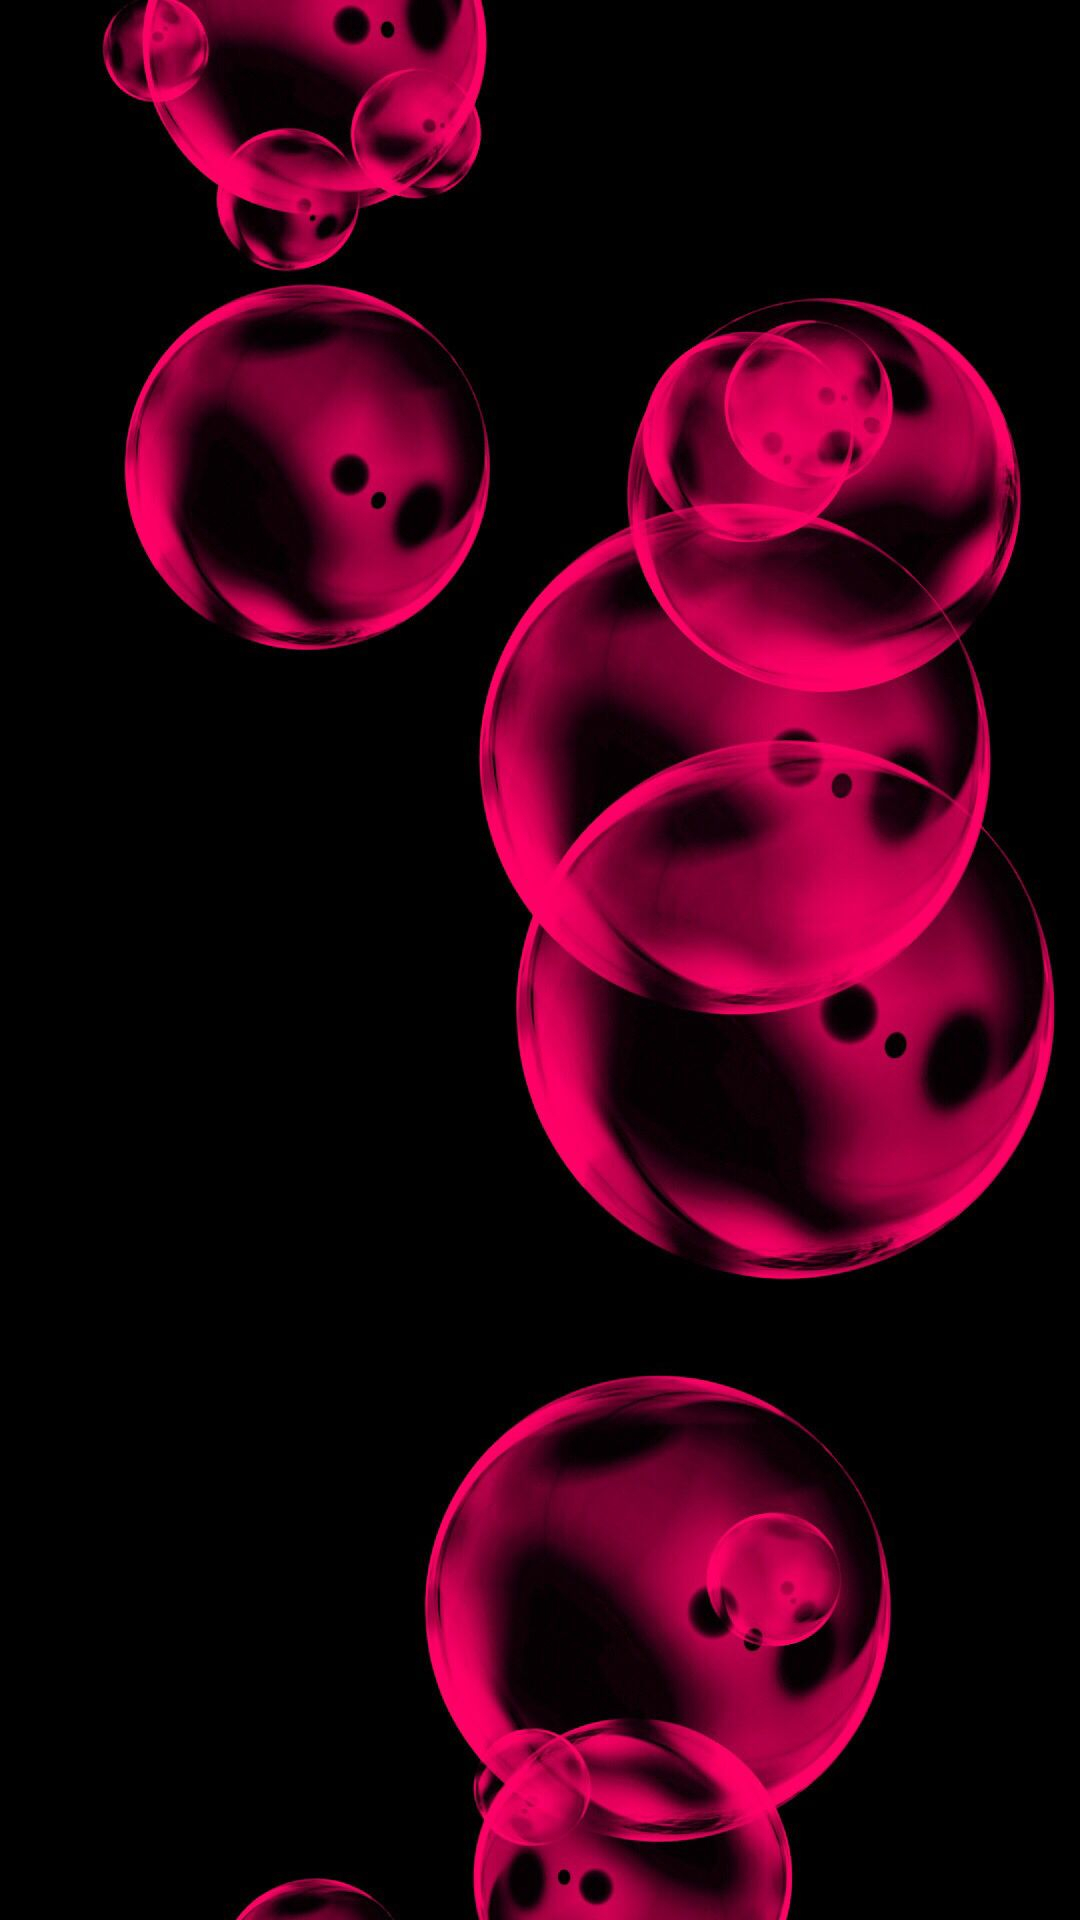 1080x1920 A picture from Kefir: | Bubbles wallpaper, Colorful wallpaper, Galaxy wallpaper